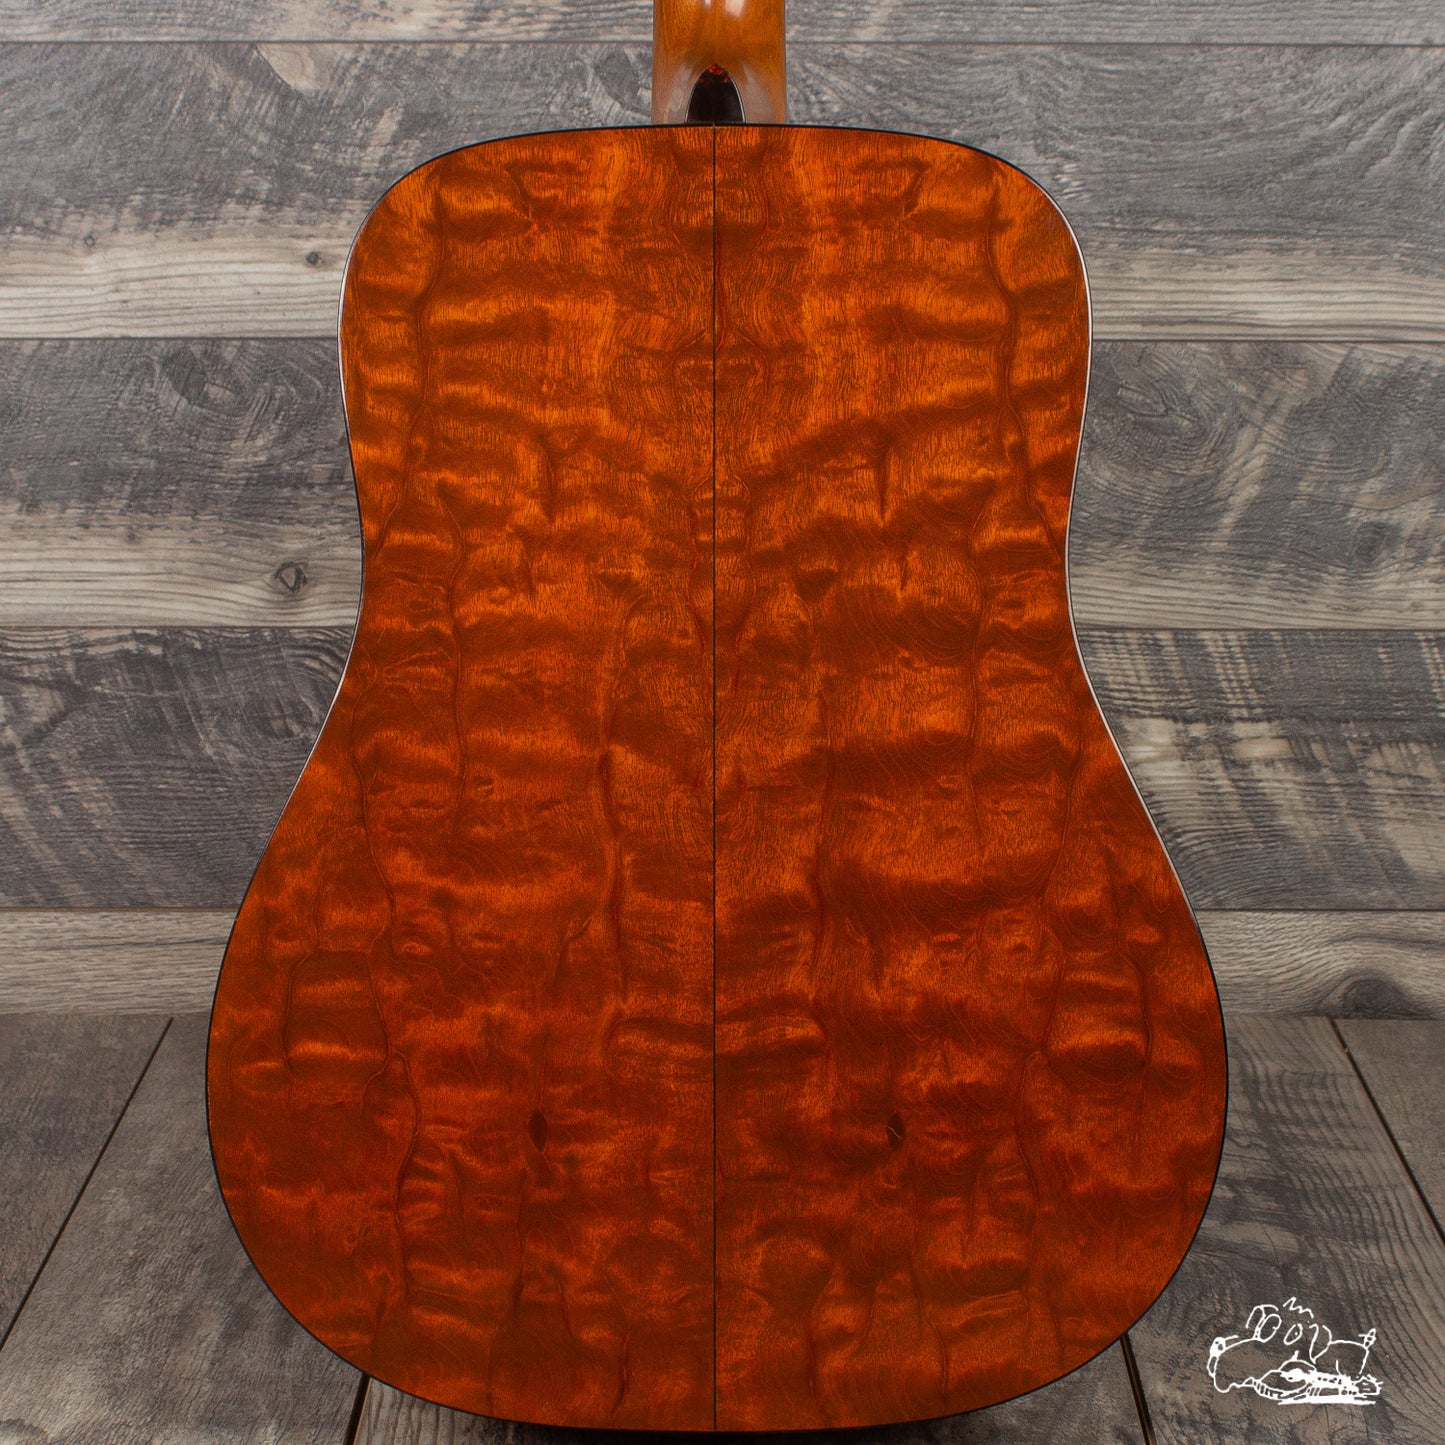 1987 Martin D-18 Limited Editon, Quilted Mahogany from “THE TREE”